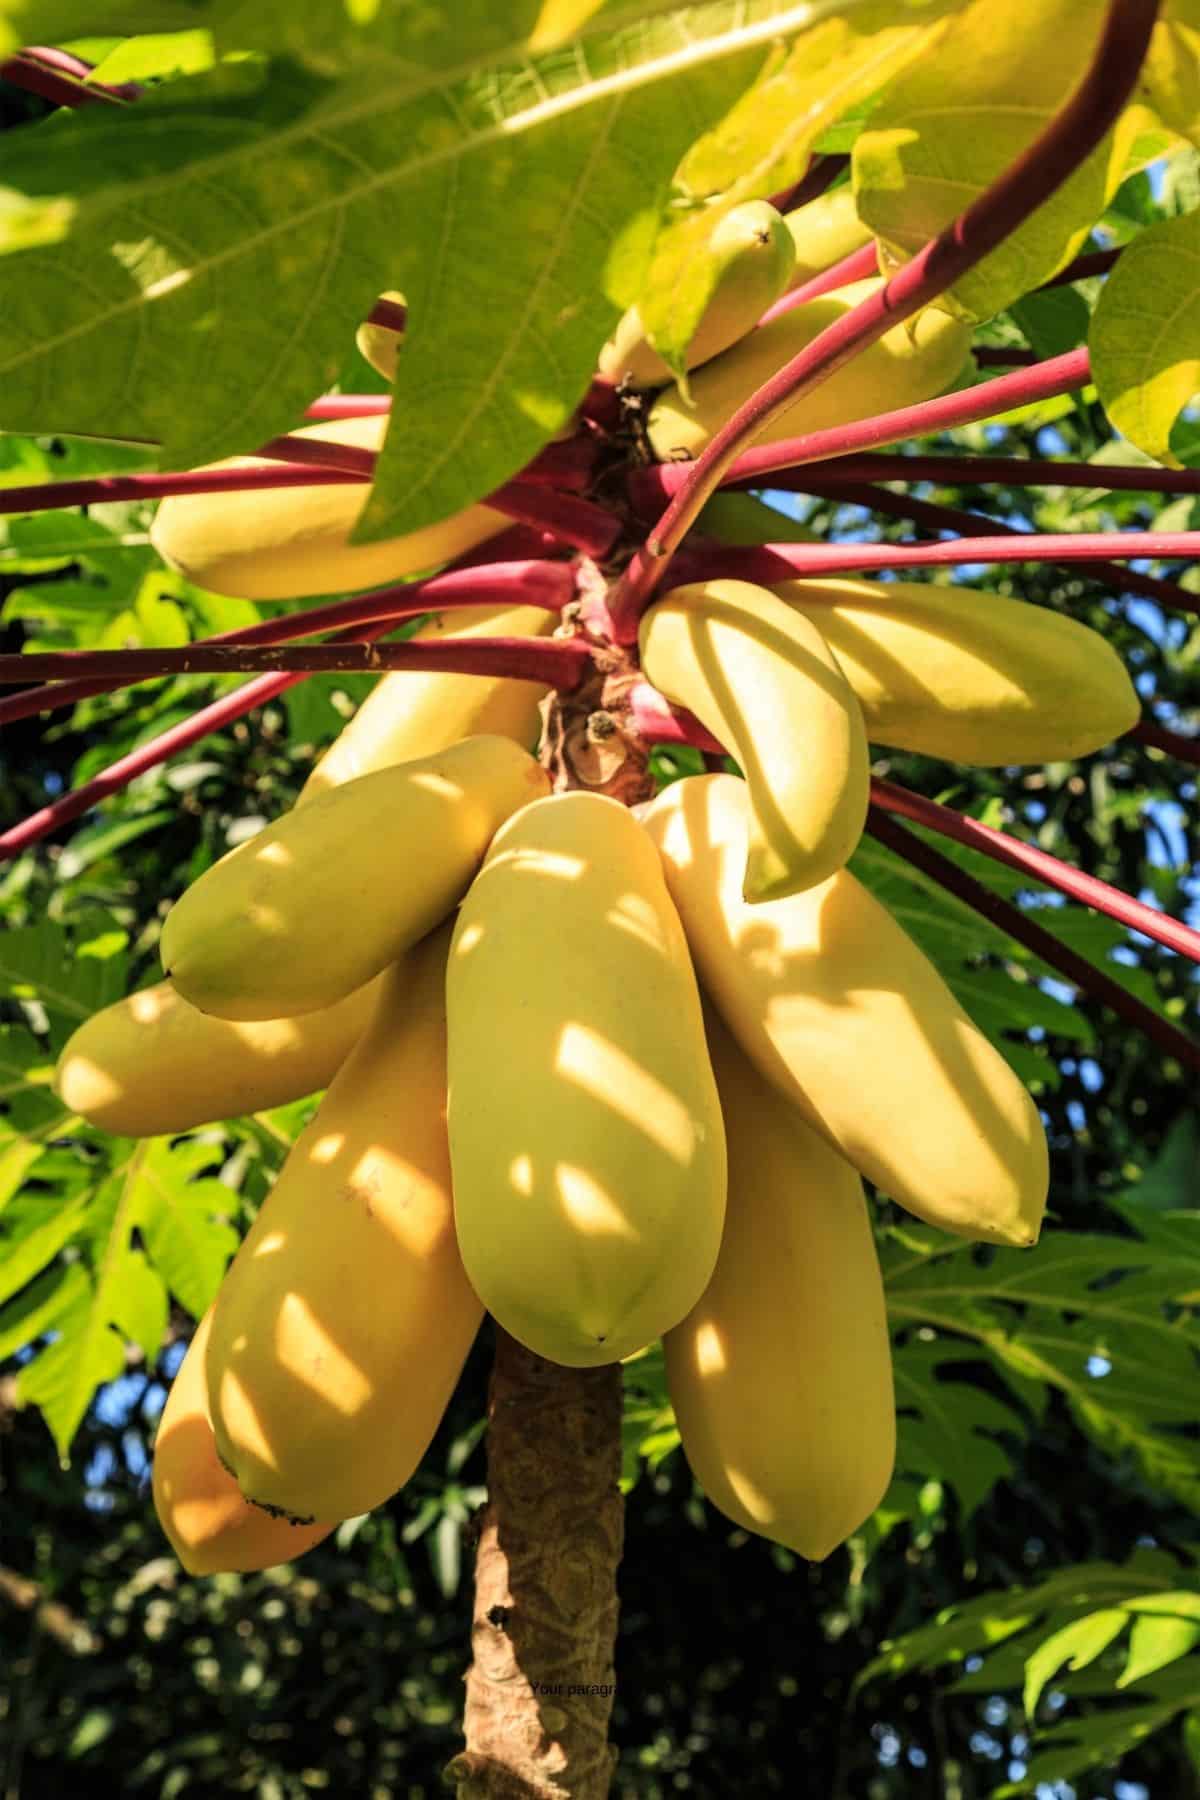 mangoes growing on a tree.